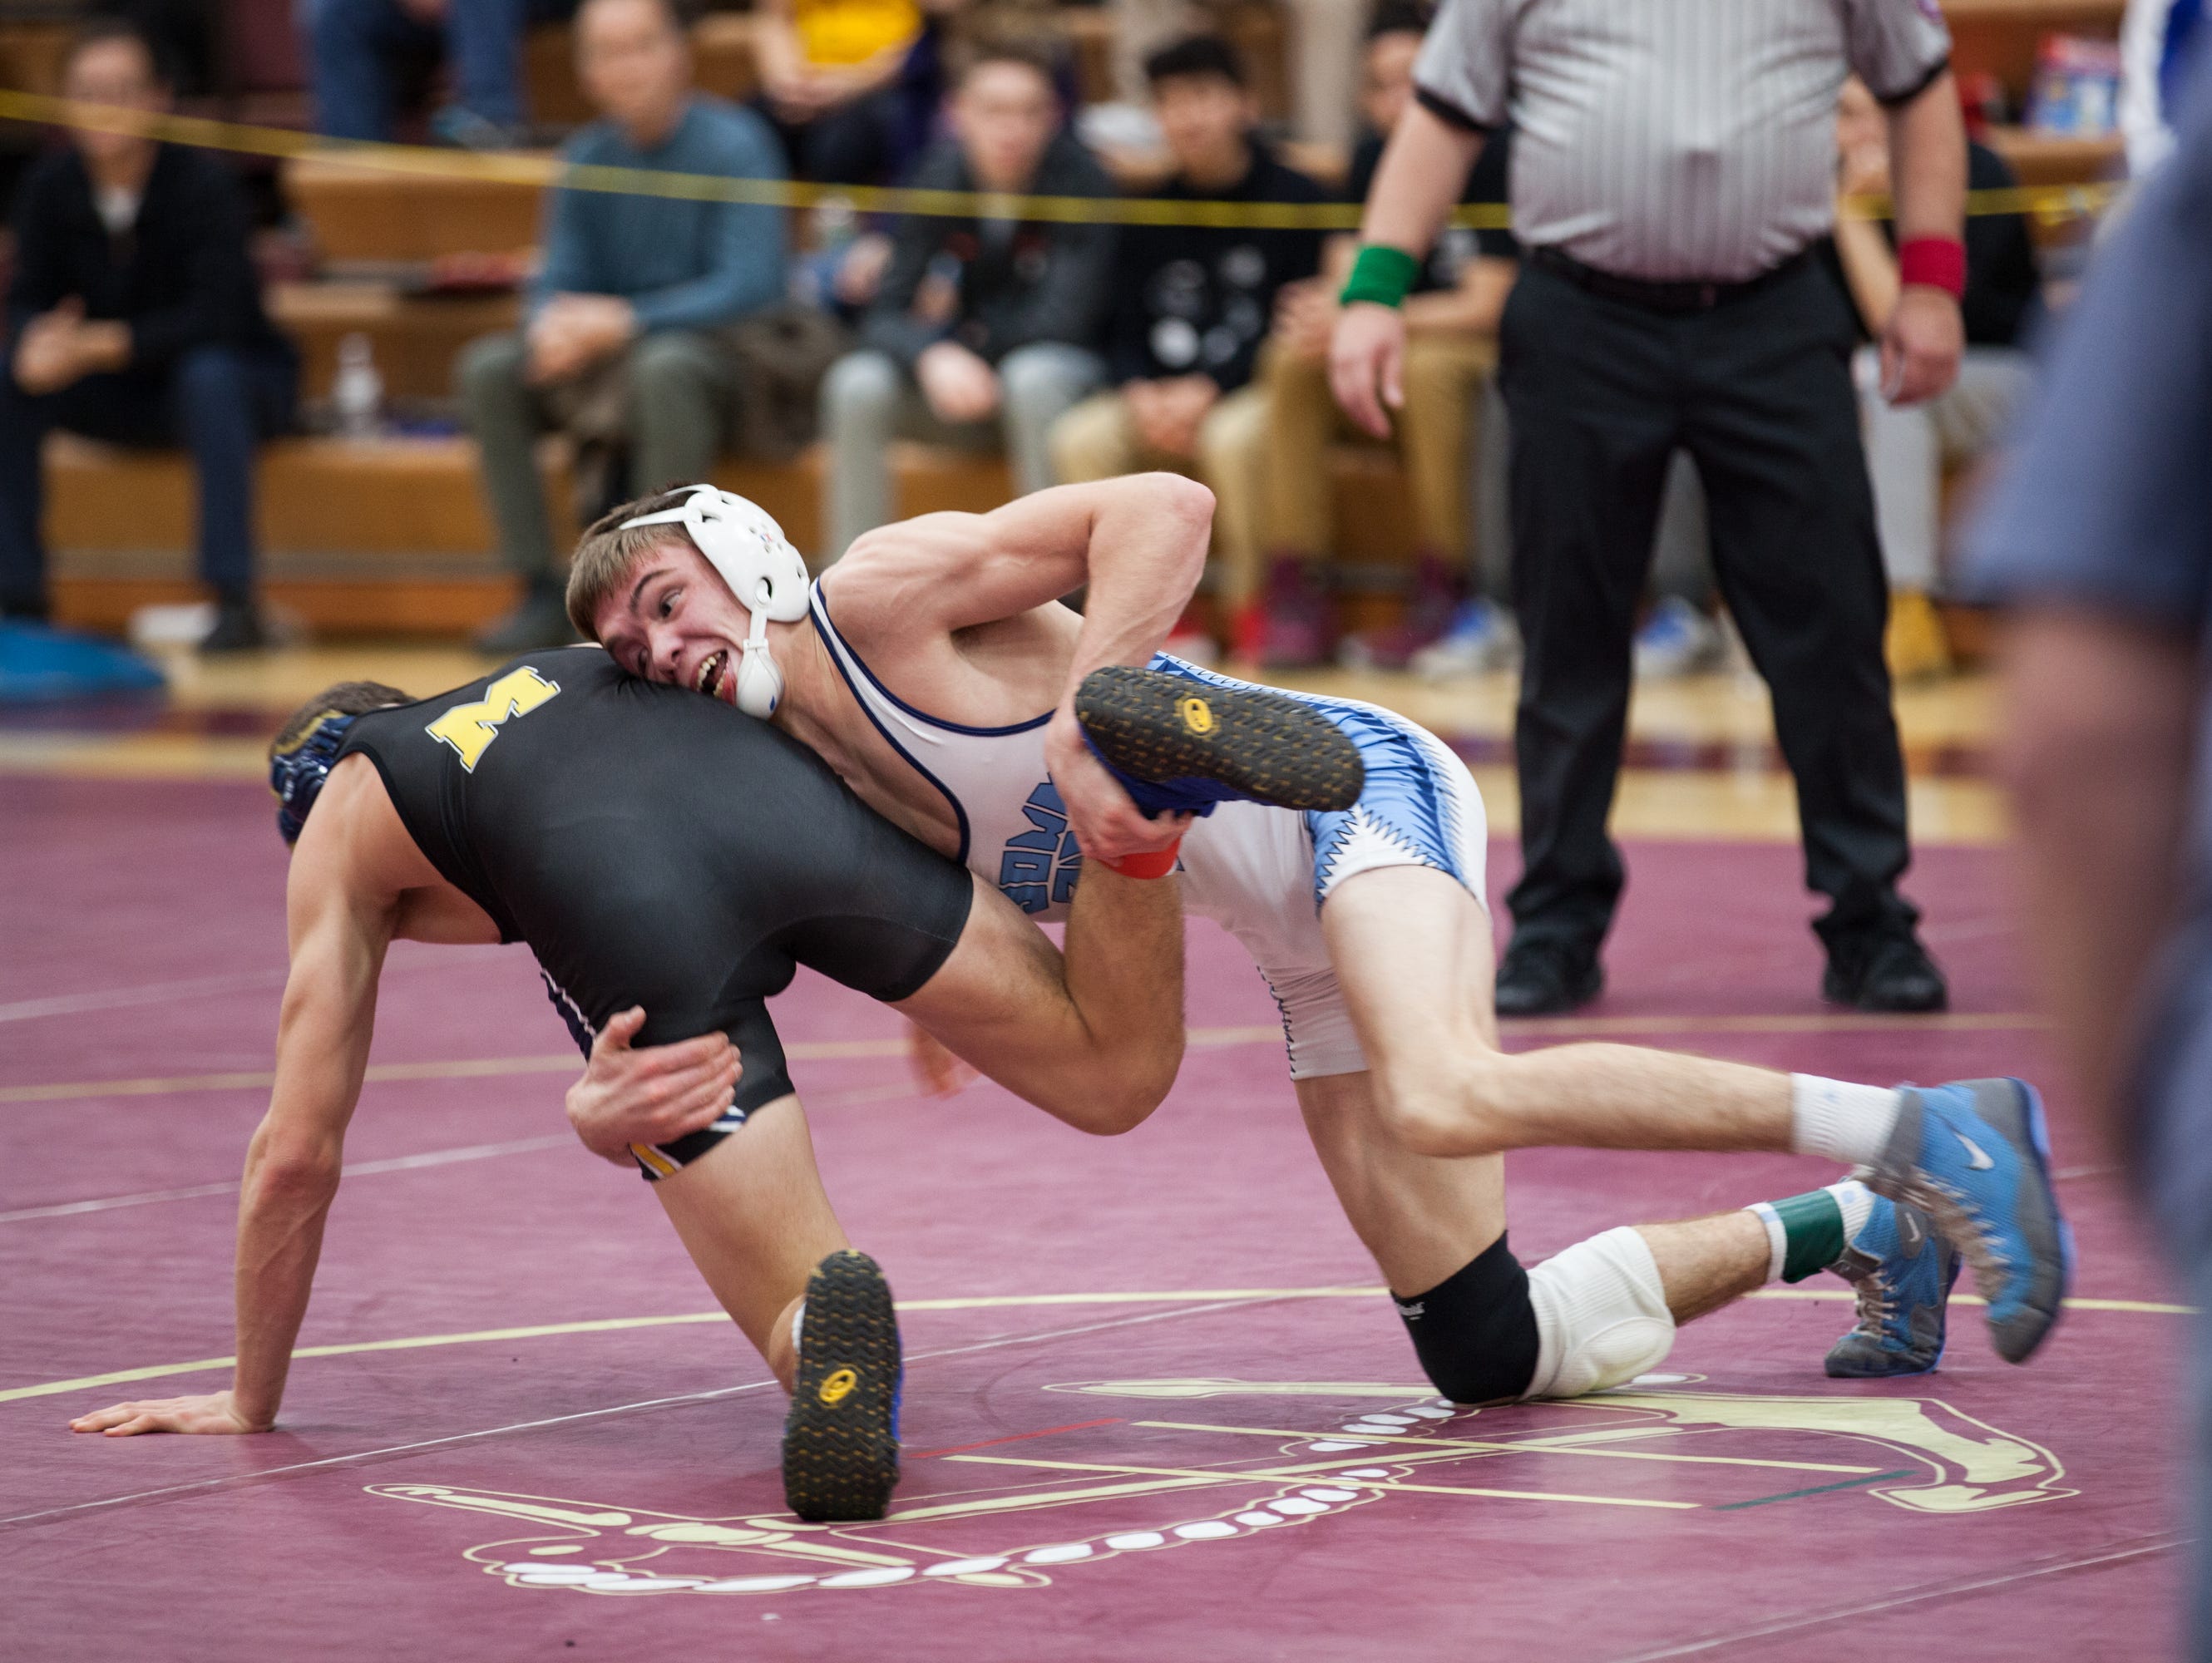 John Jay High School's Randy Earl, right, and Mattituck's Jack Bokina tangle in the 126-pound final at the Mid-Hudson Wrestling tournament at Arlington on Dec. 28.